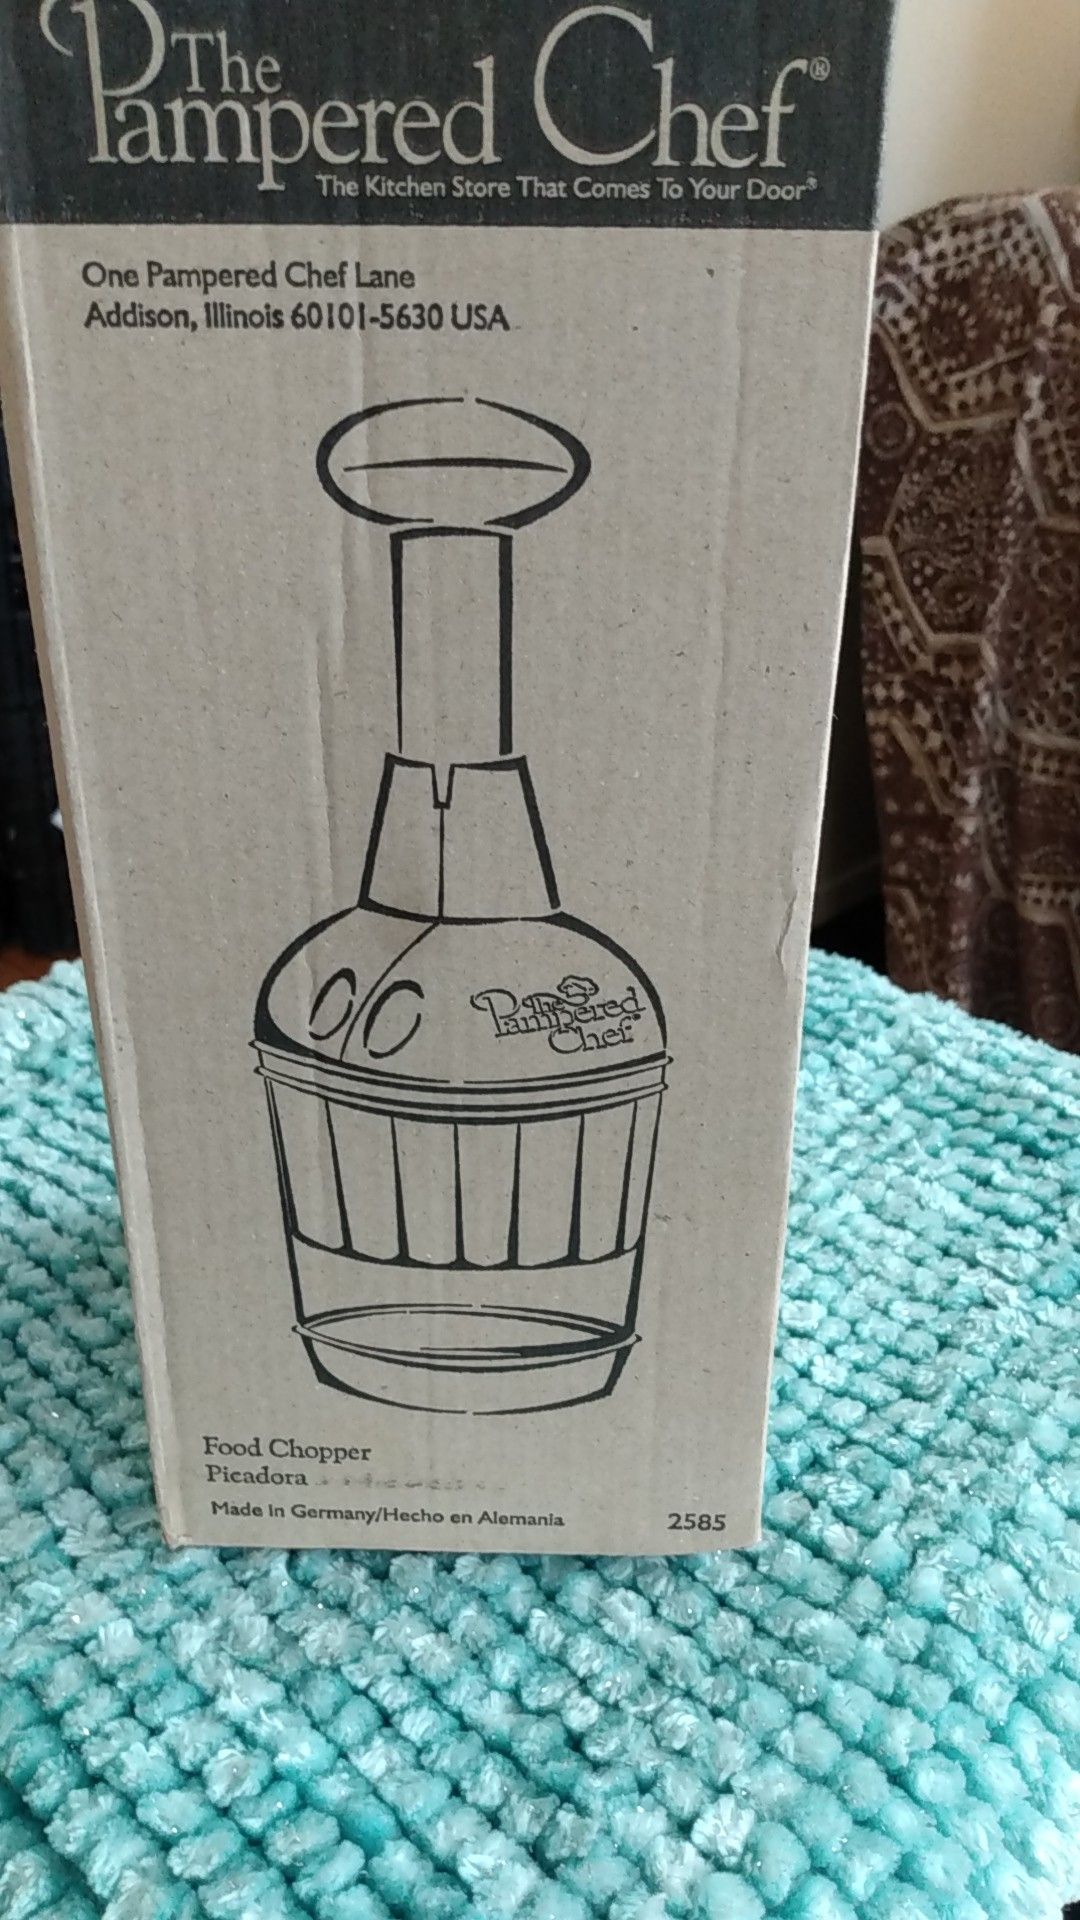 The pampered chef food chopper